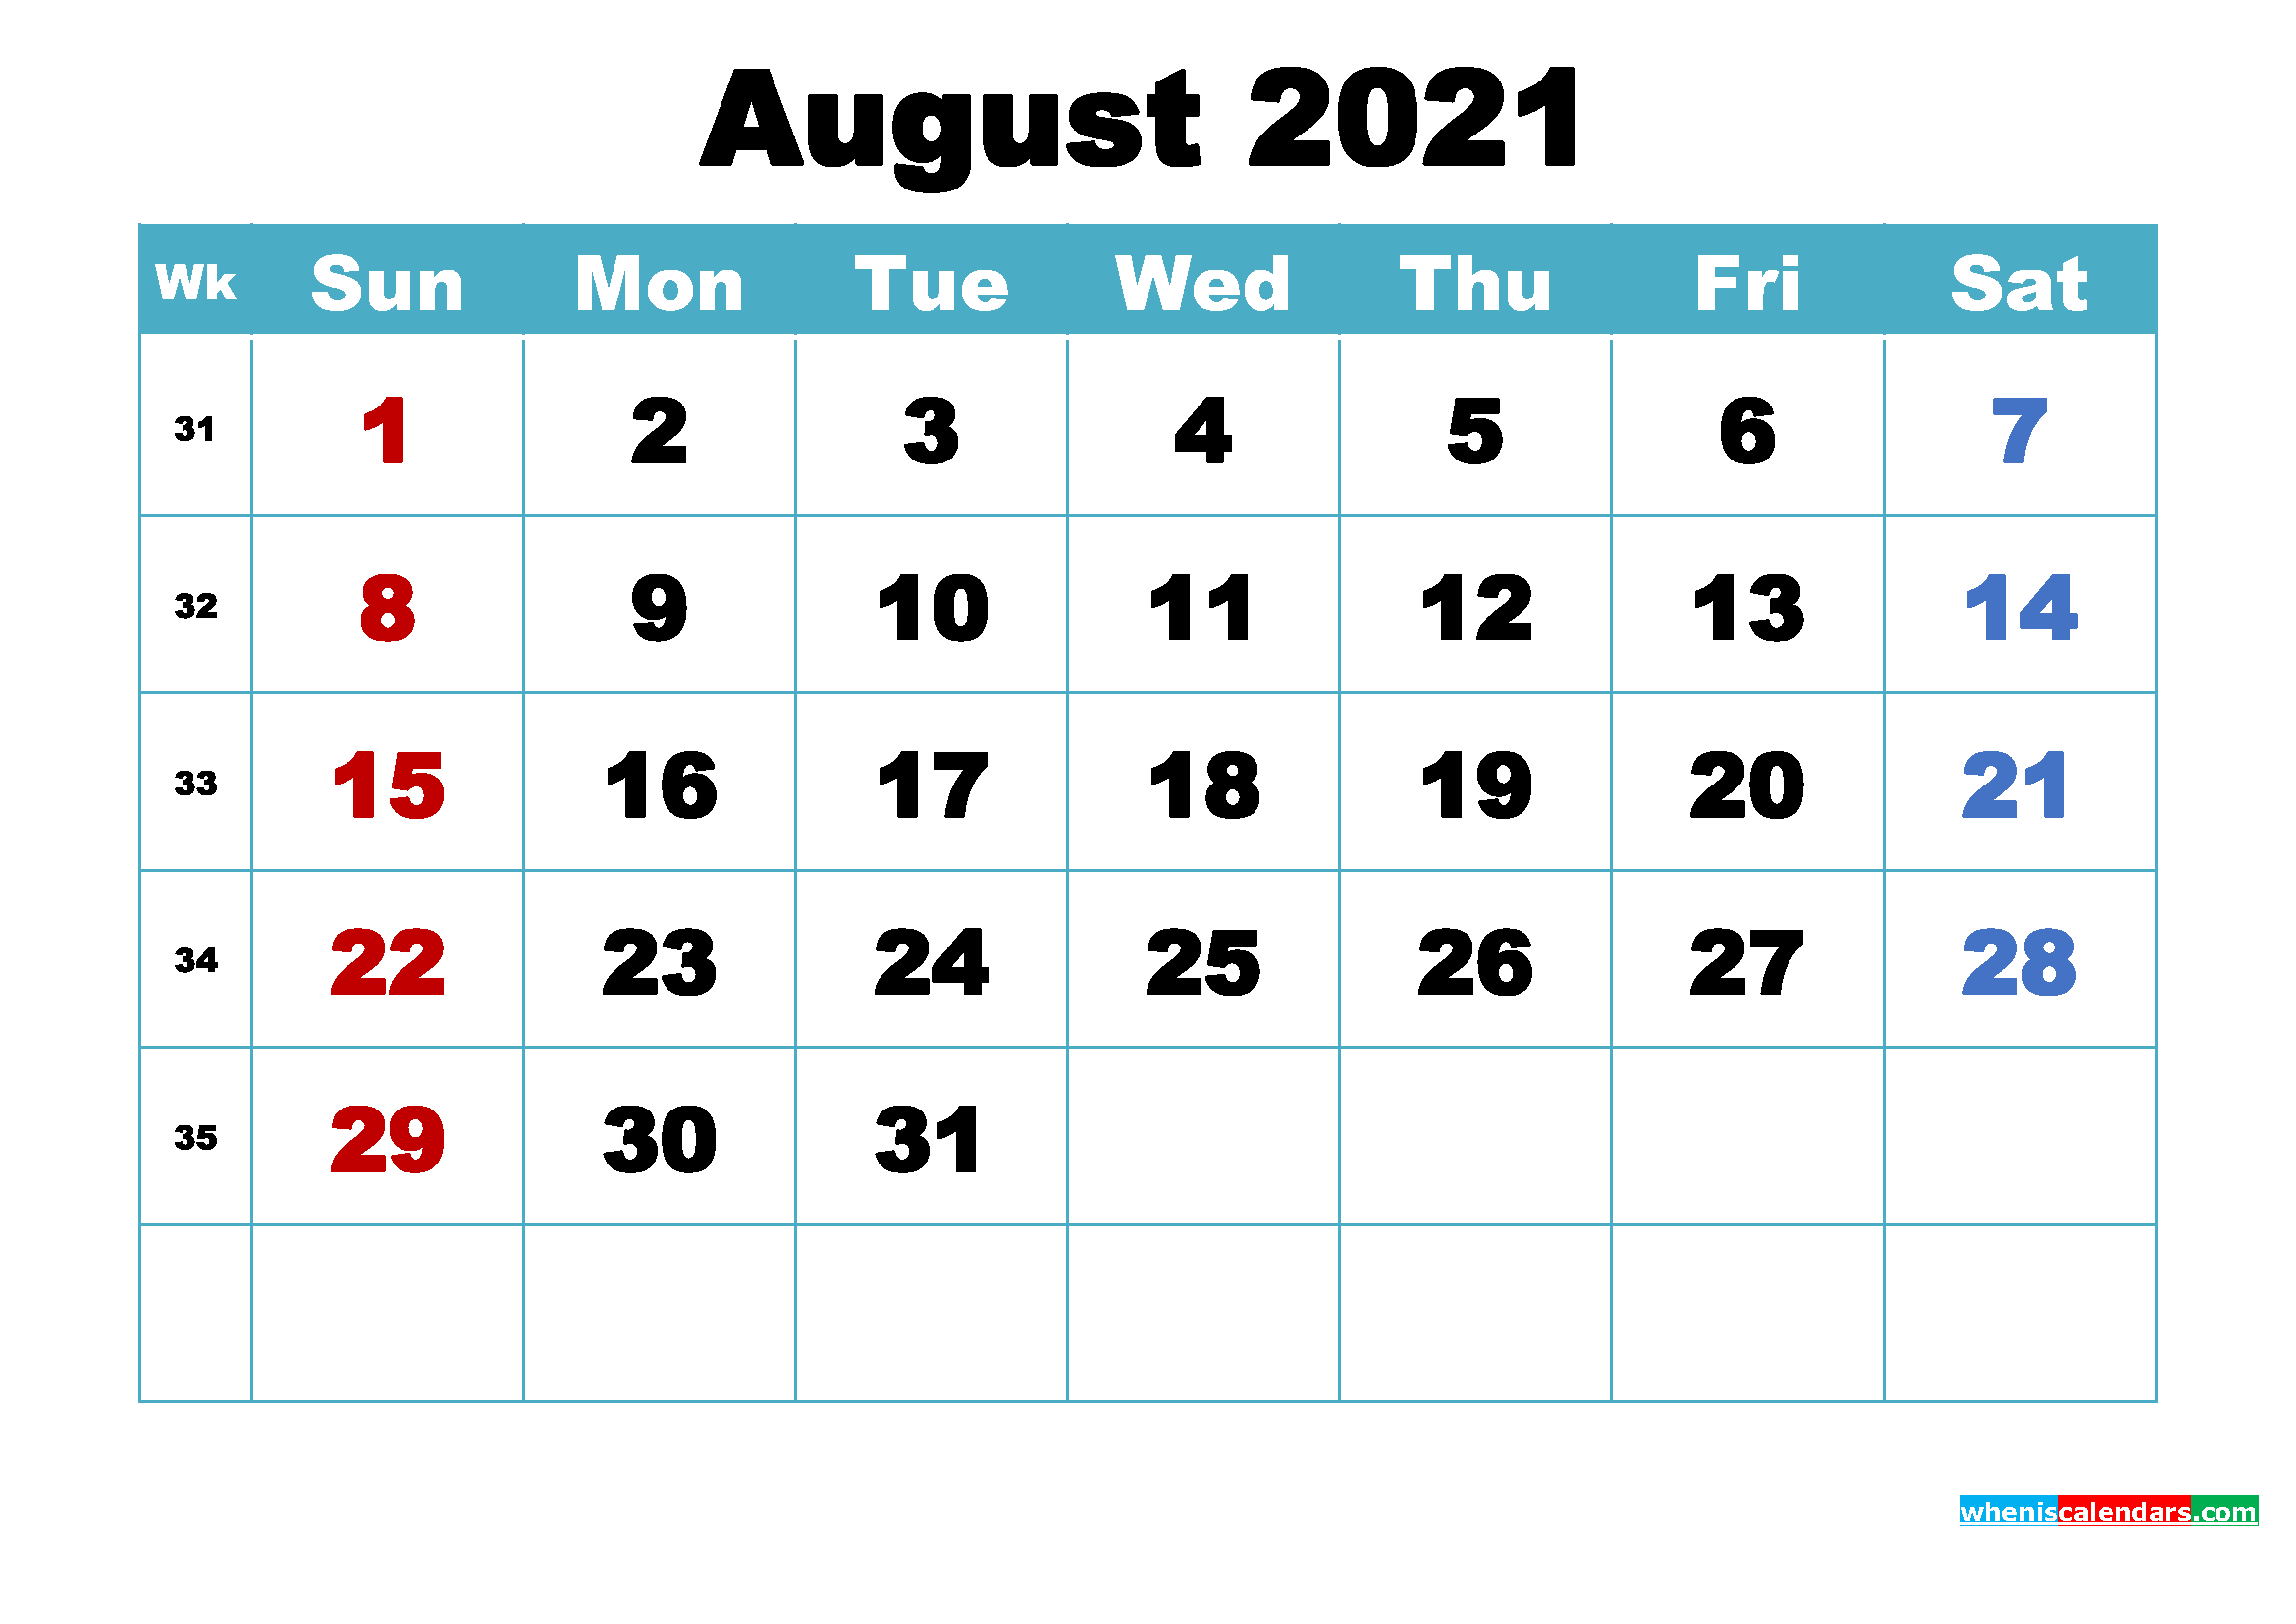 August 2021 Calendar Wallpaper Free Download-Free Two Page August 2021 Month